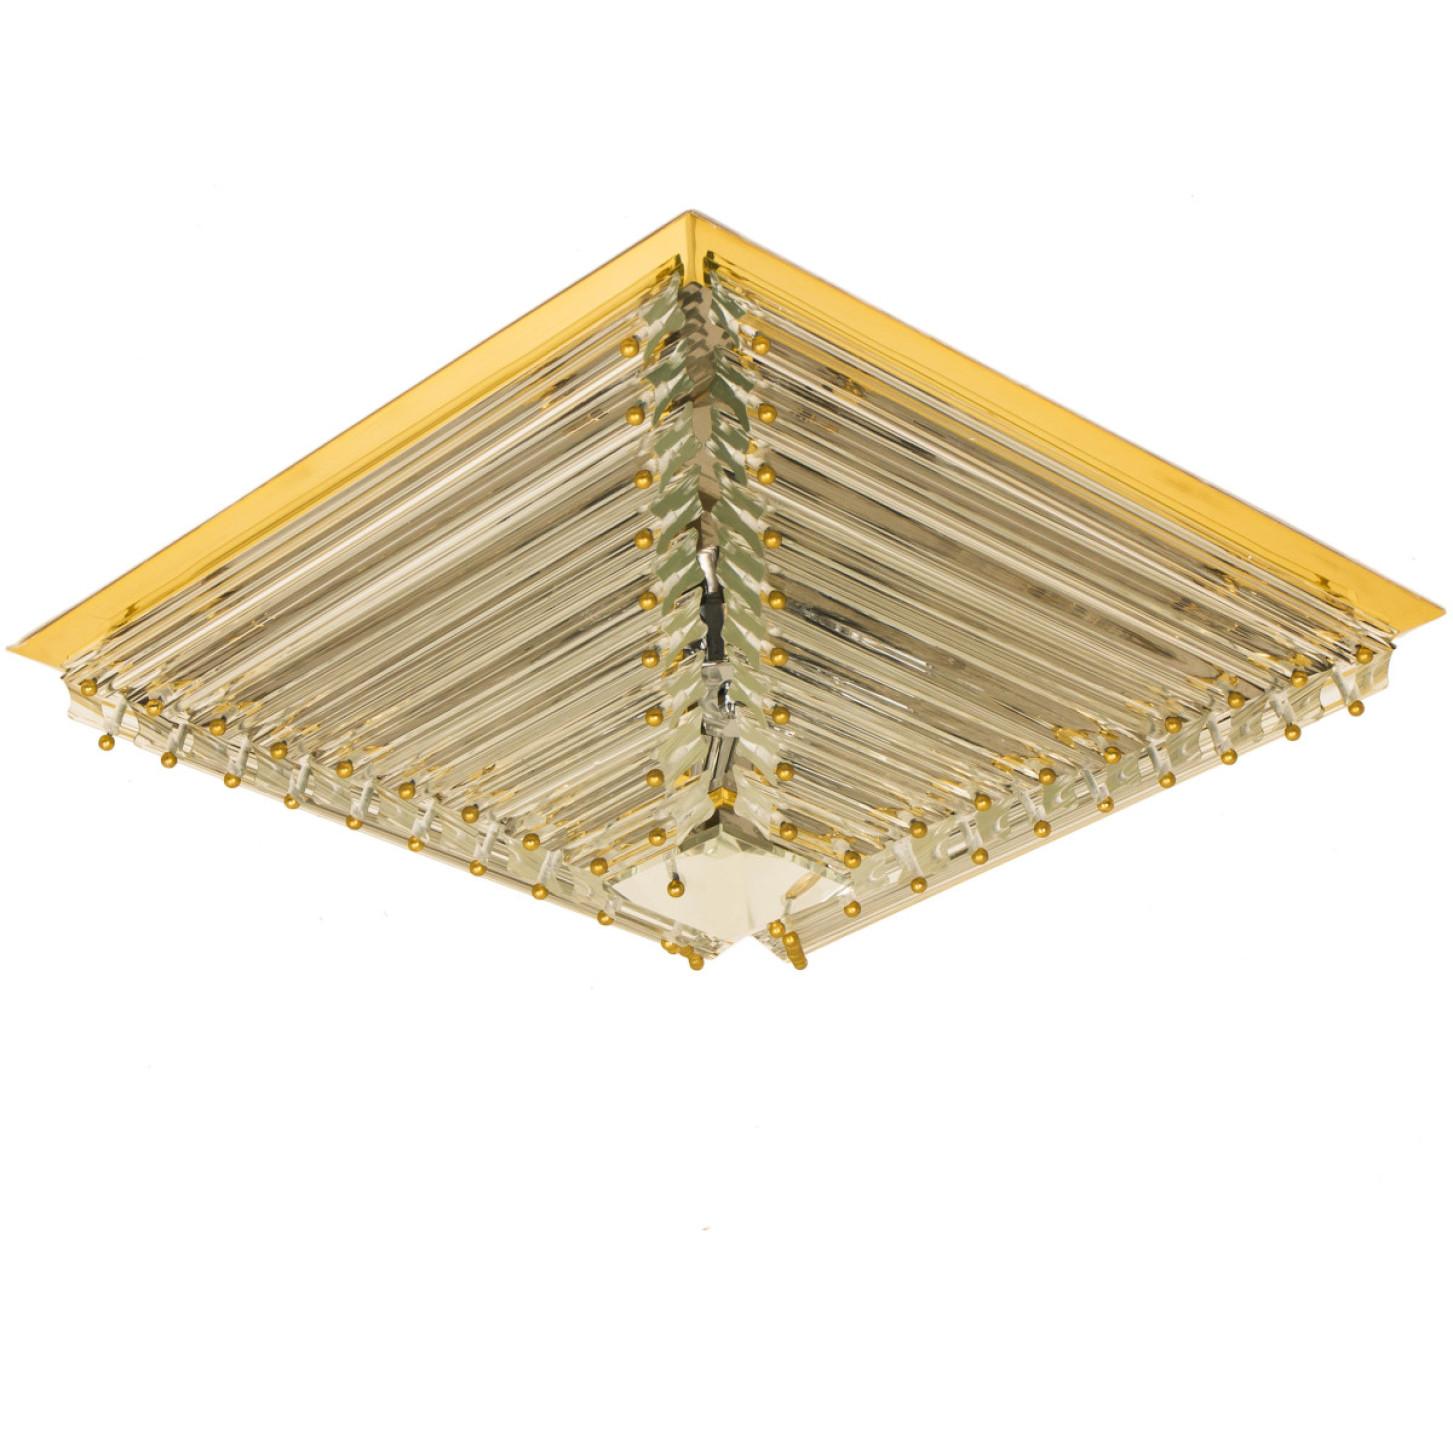 1 of the 2 gold-plated Venini flush mounts with faceted clear crystal tubes of Murano glass. Modellated in the form of a pyramid. The flush mounts are designed and produced by Venini in Italy from the 1970s. The Murano tubes are suspended on a